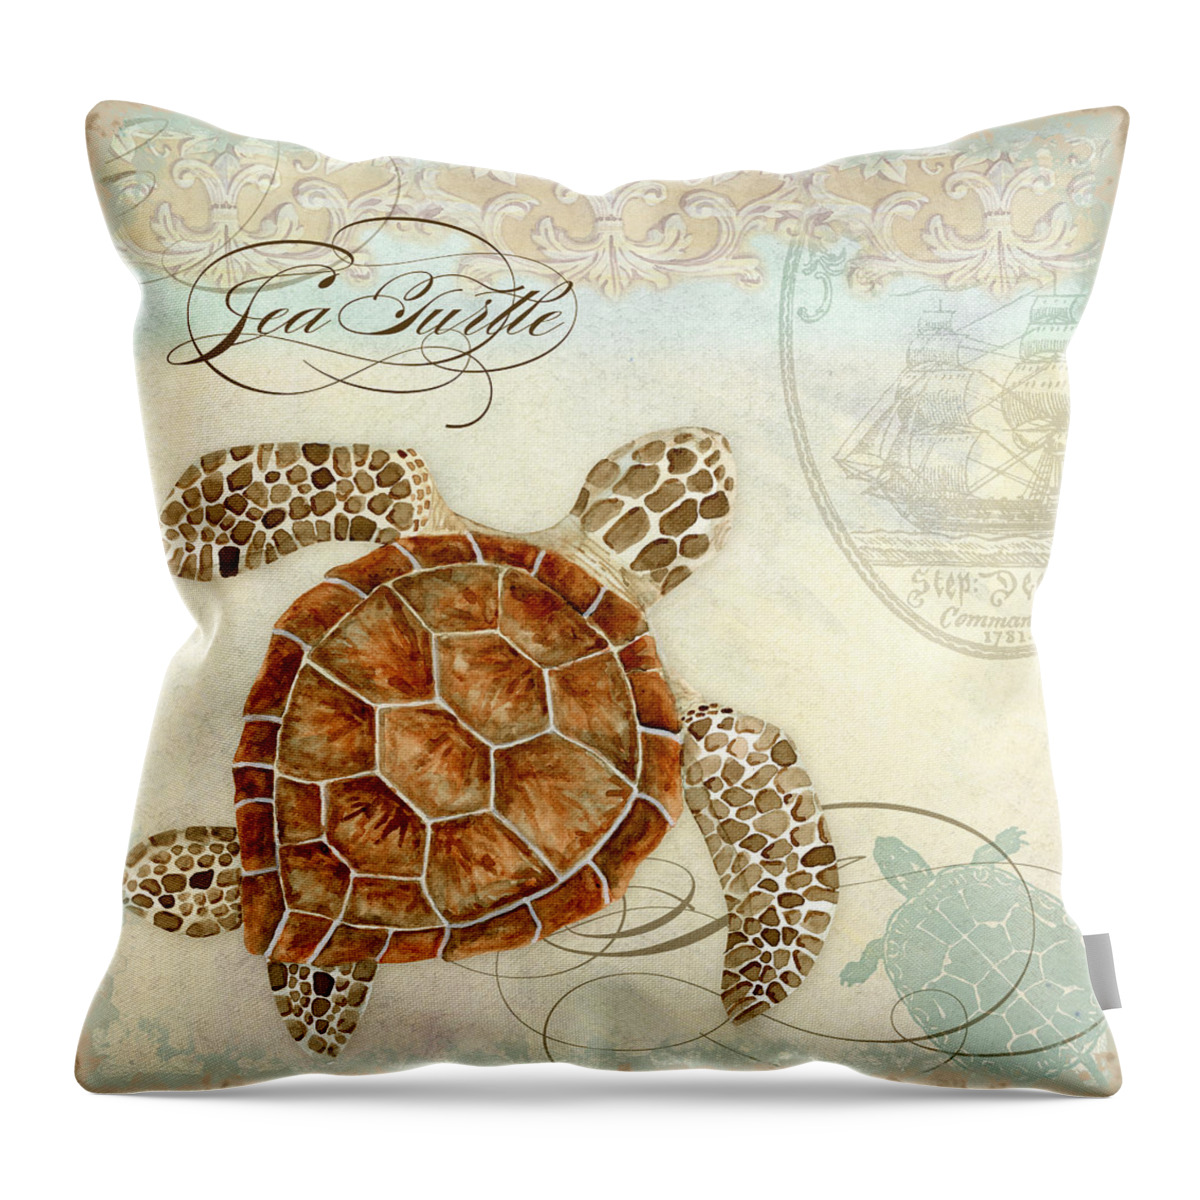 Watercolor Throw Pillow featuring the painting Coastal Waterways - Green Sea Turtle 2 by Audrey Jeanne Roberts